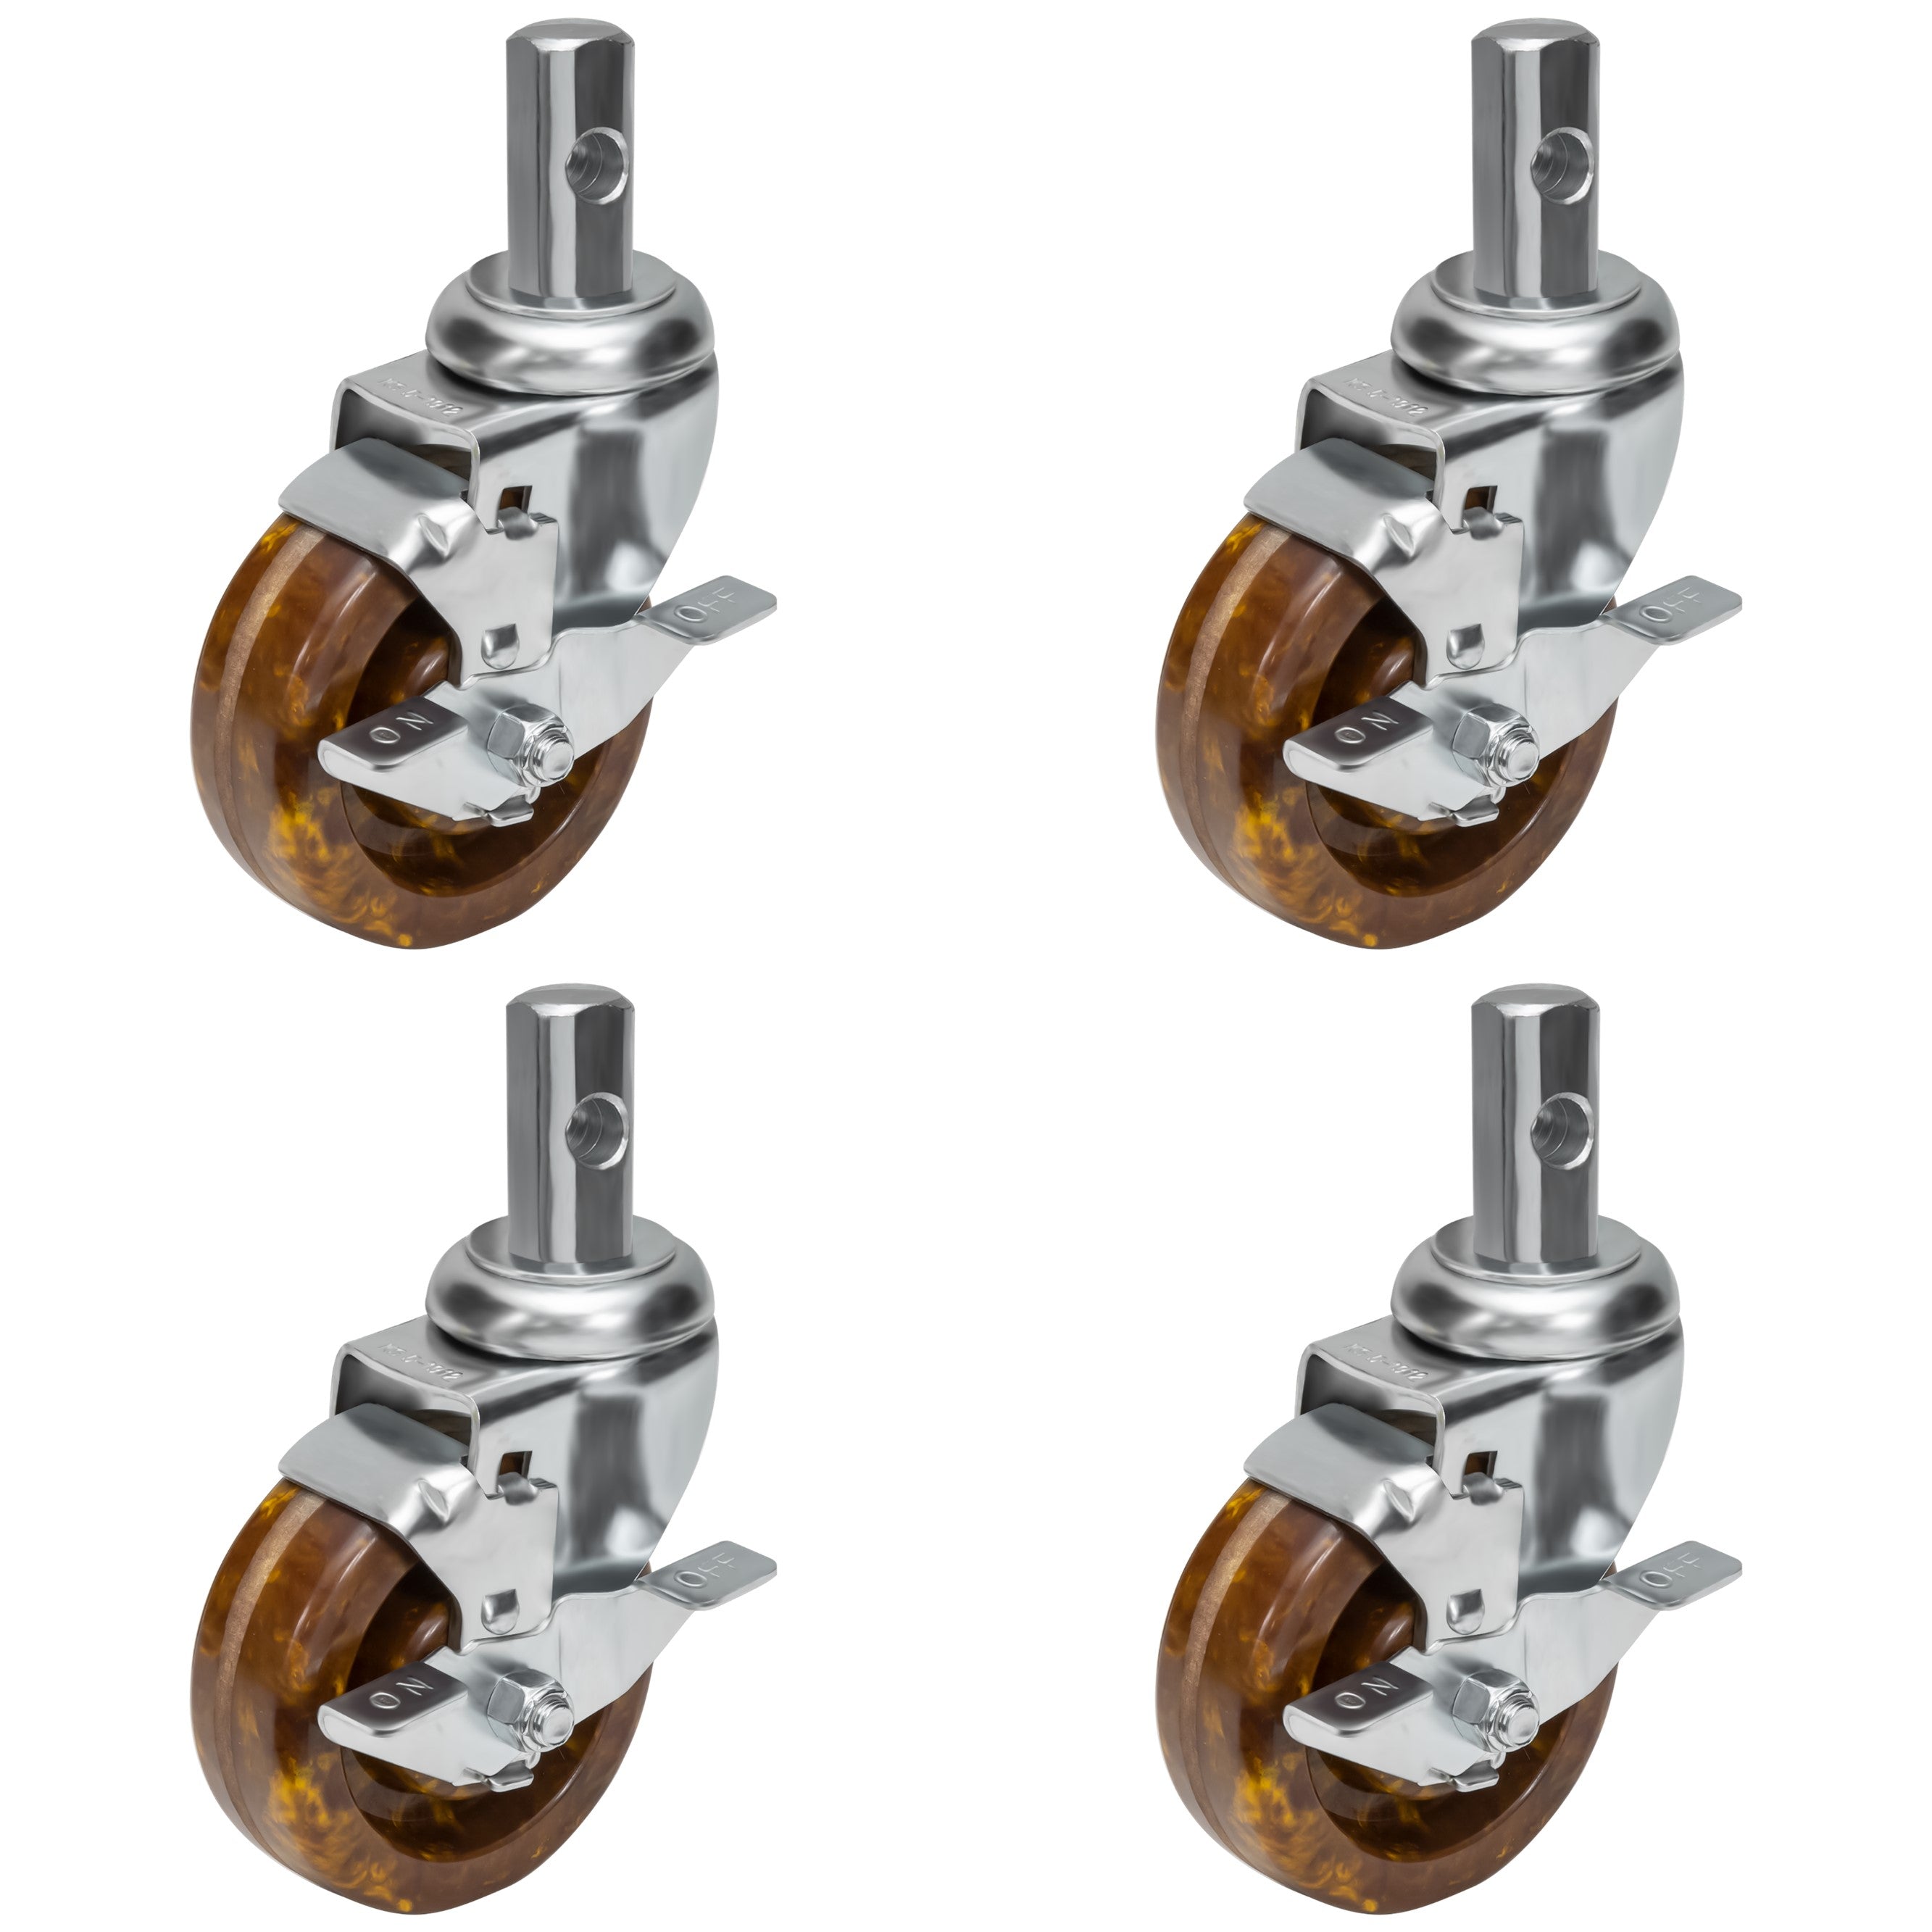 GSW 5" High-Temperature Oven Rack Casters - Square Stem Casters - Set of 4 Phenolic Casters with 1200 Lbs Loading Capacity for Pan Racks (Swivel with Brake)